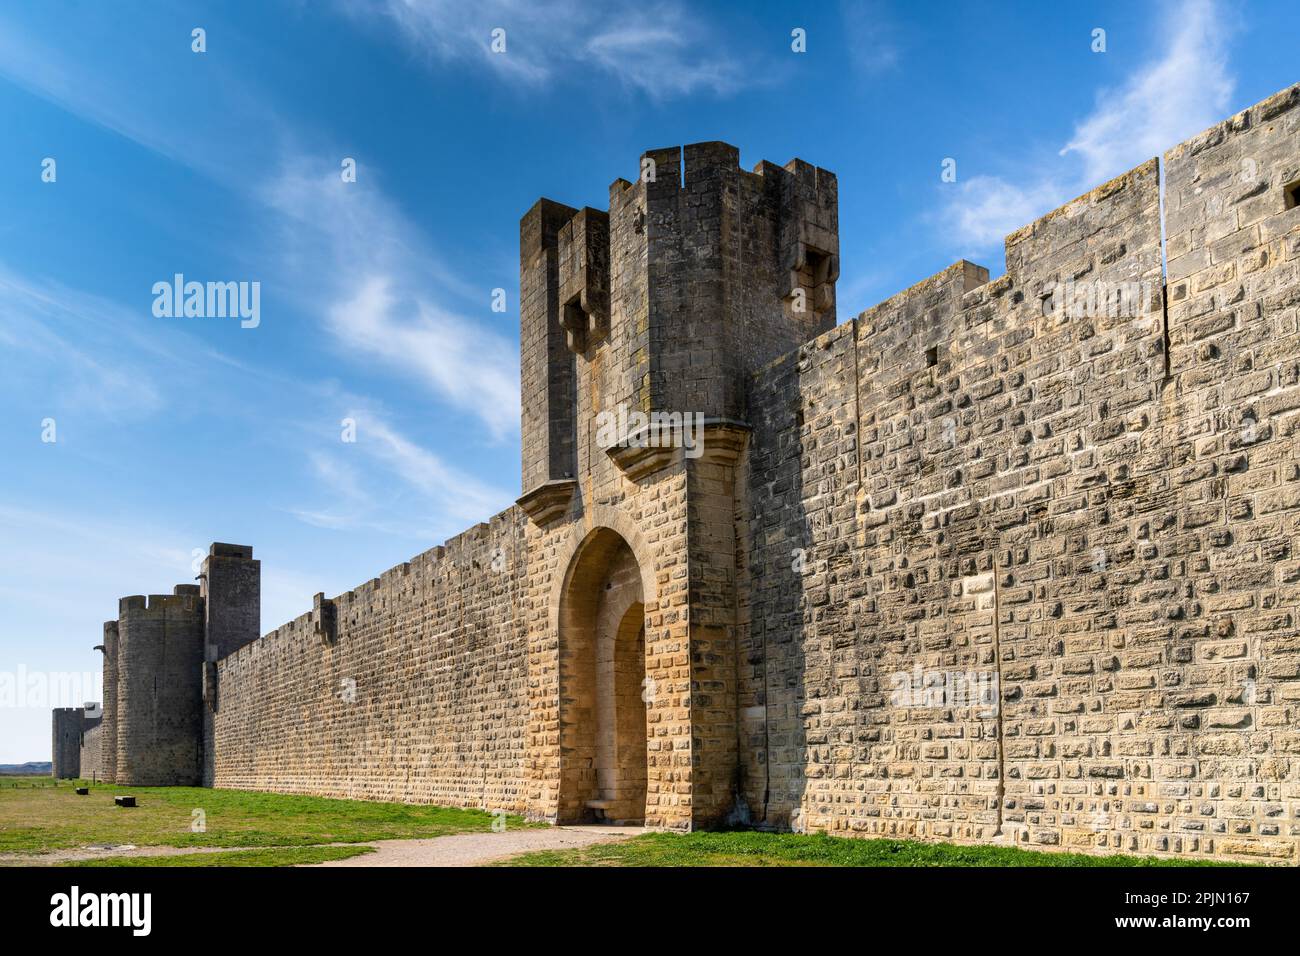 A view of the historic city walls surrounding the Camargue village of Aigues-Mortes Stock Photo